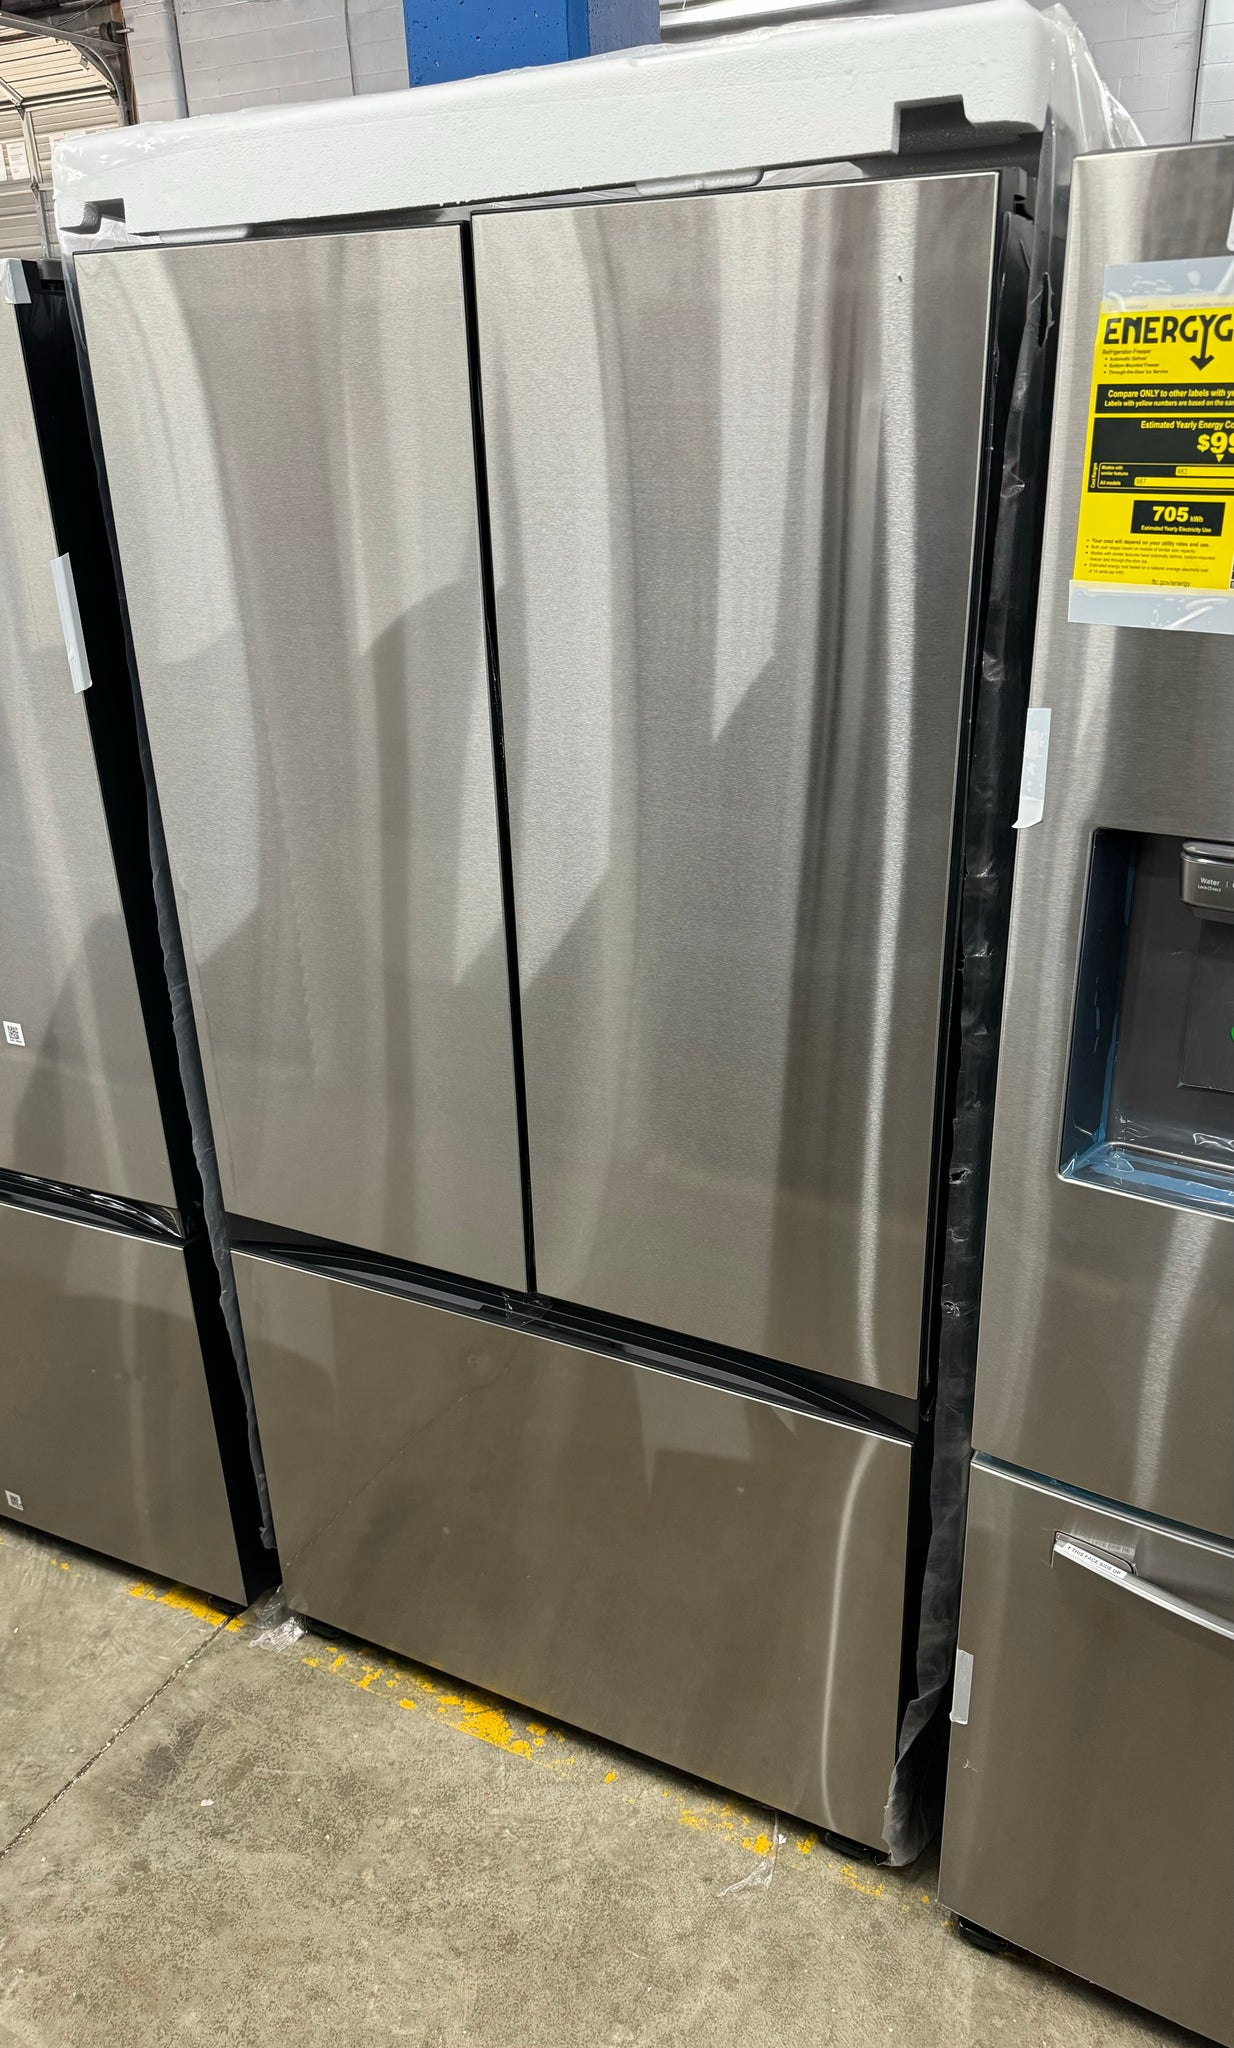 This refrigerator has an automatic water pitcher built into it